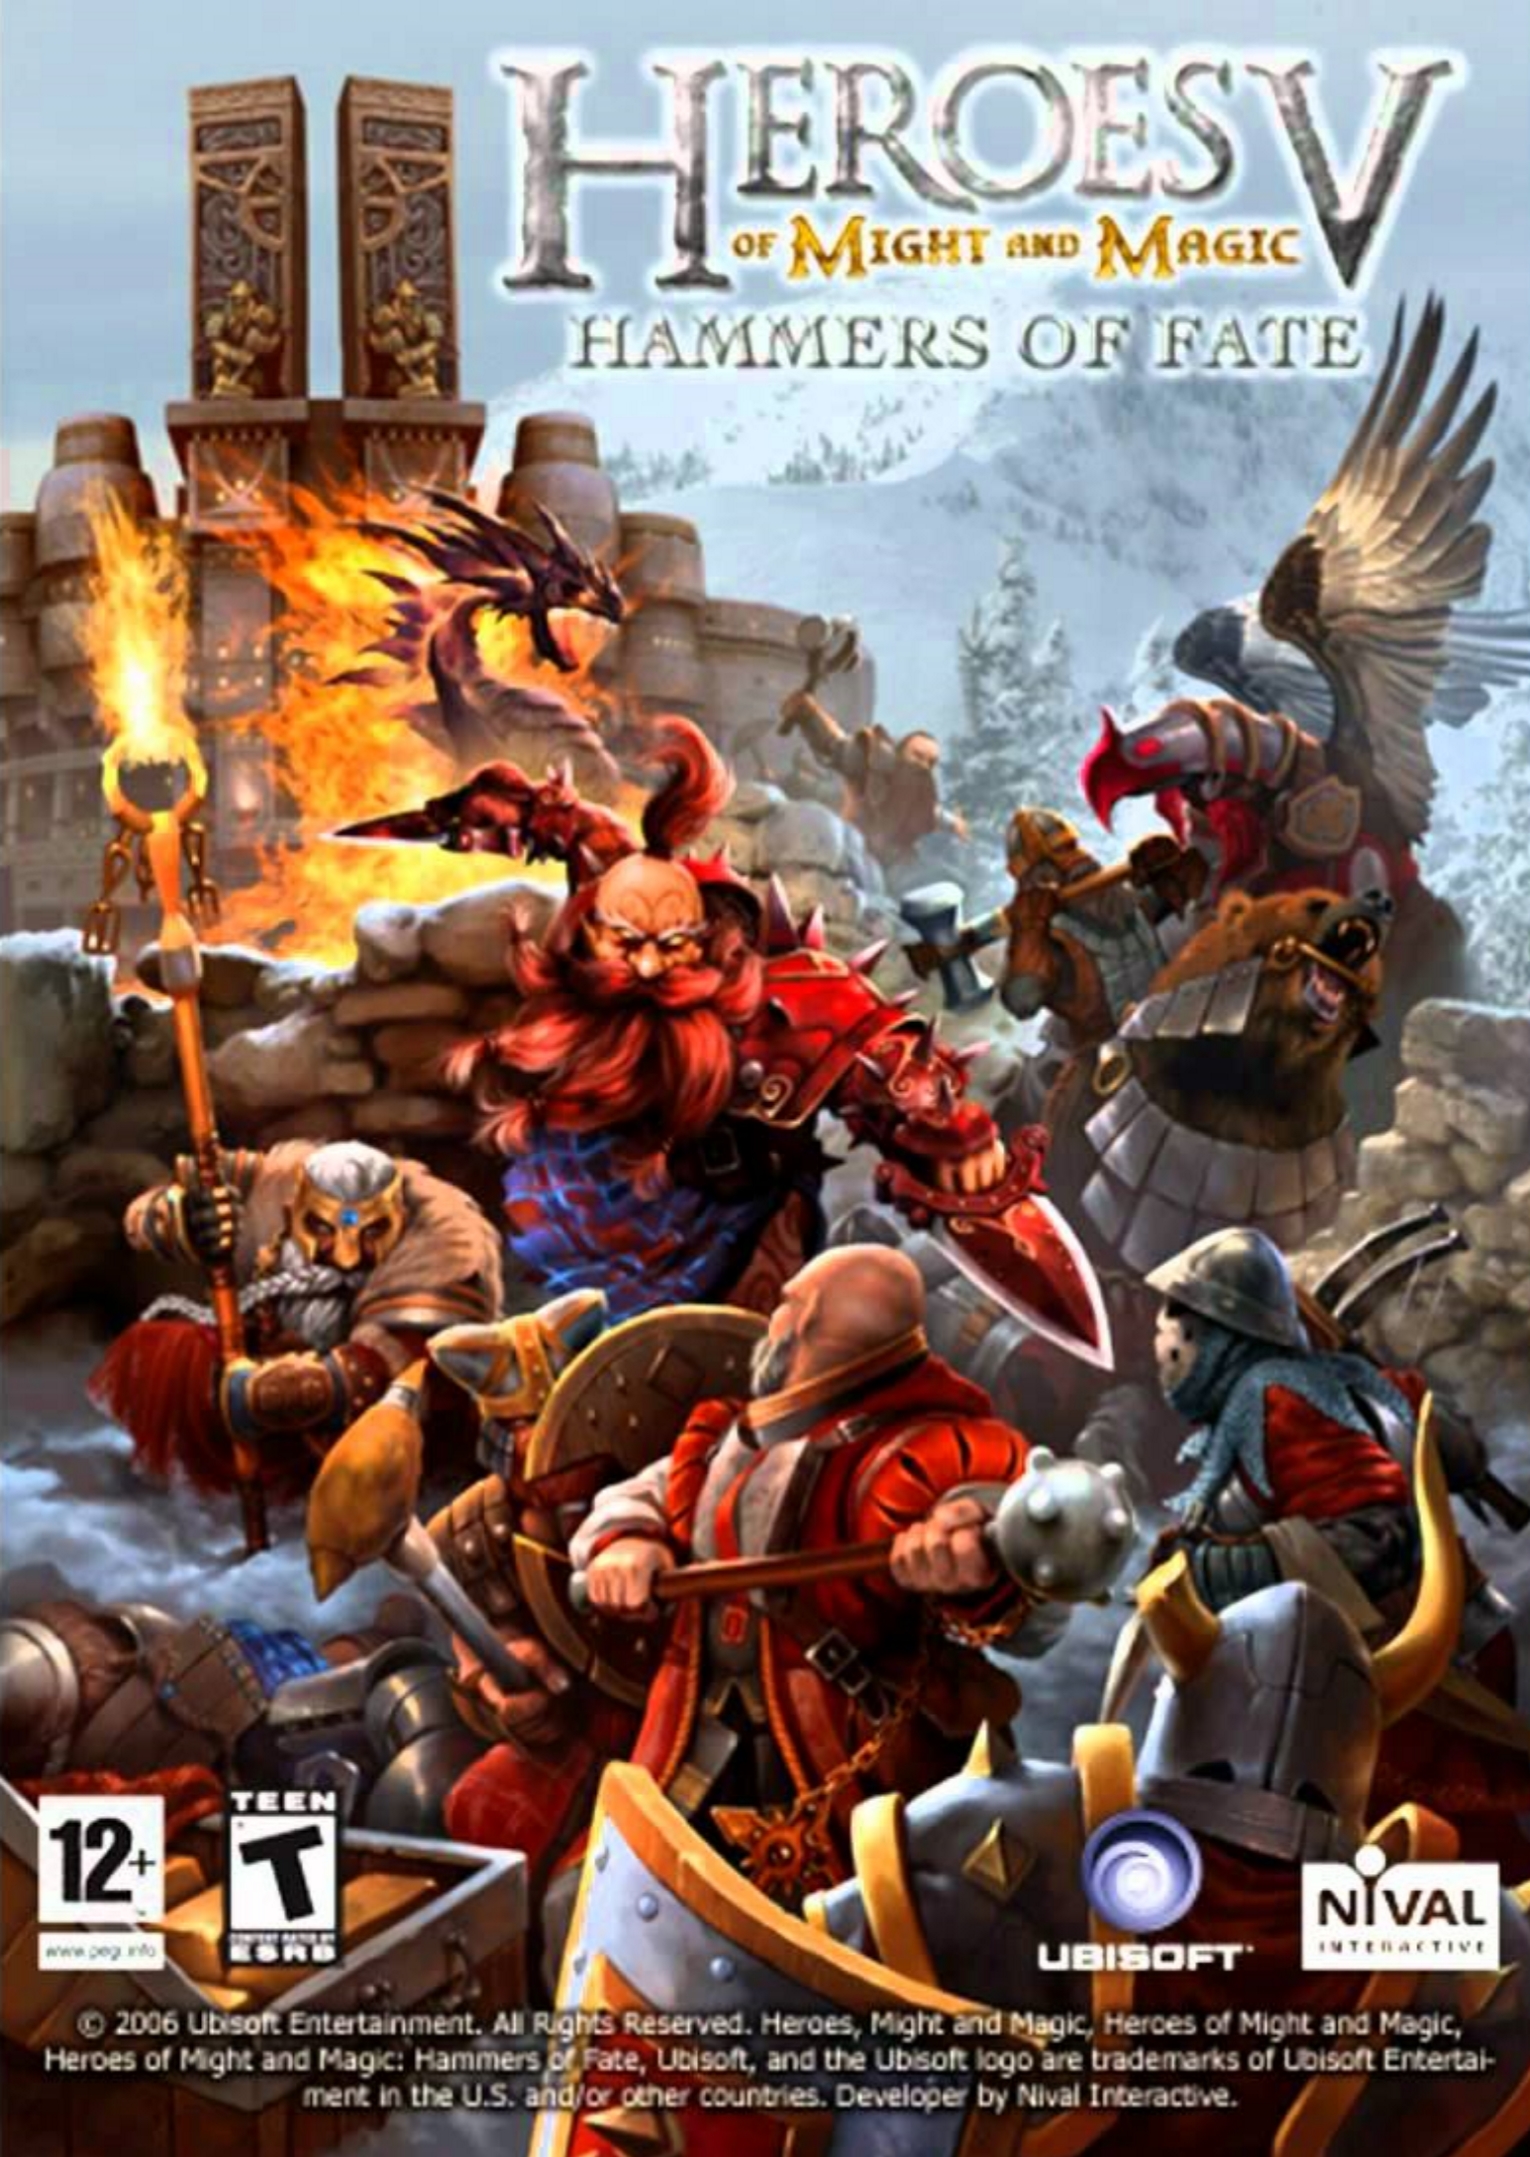 heroes-of-might-and-magic-v-hammers-of-fate-details-launchbox-games-database